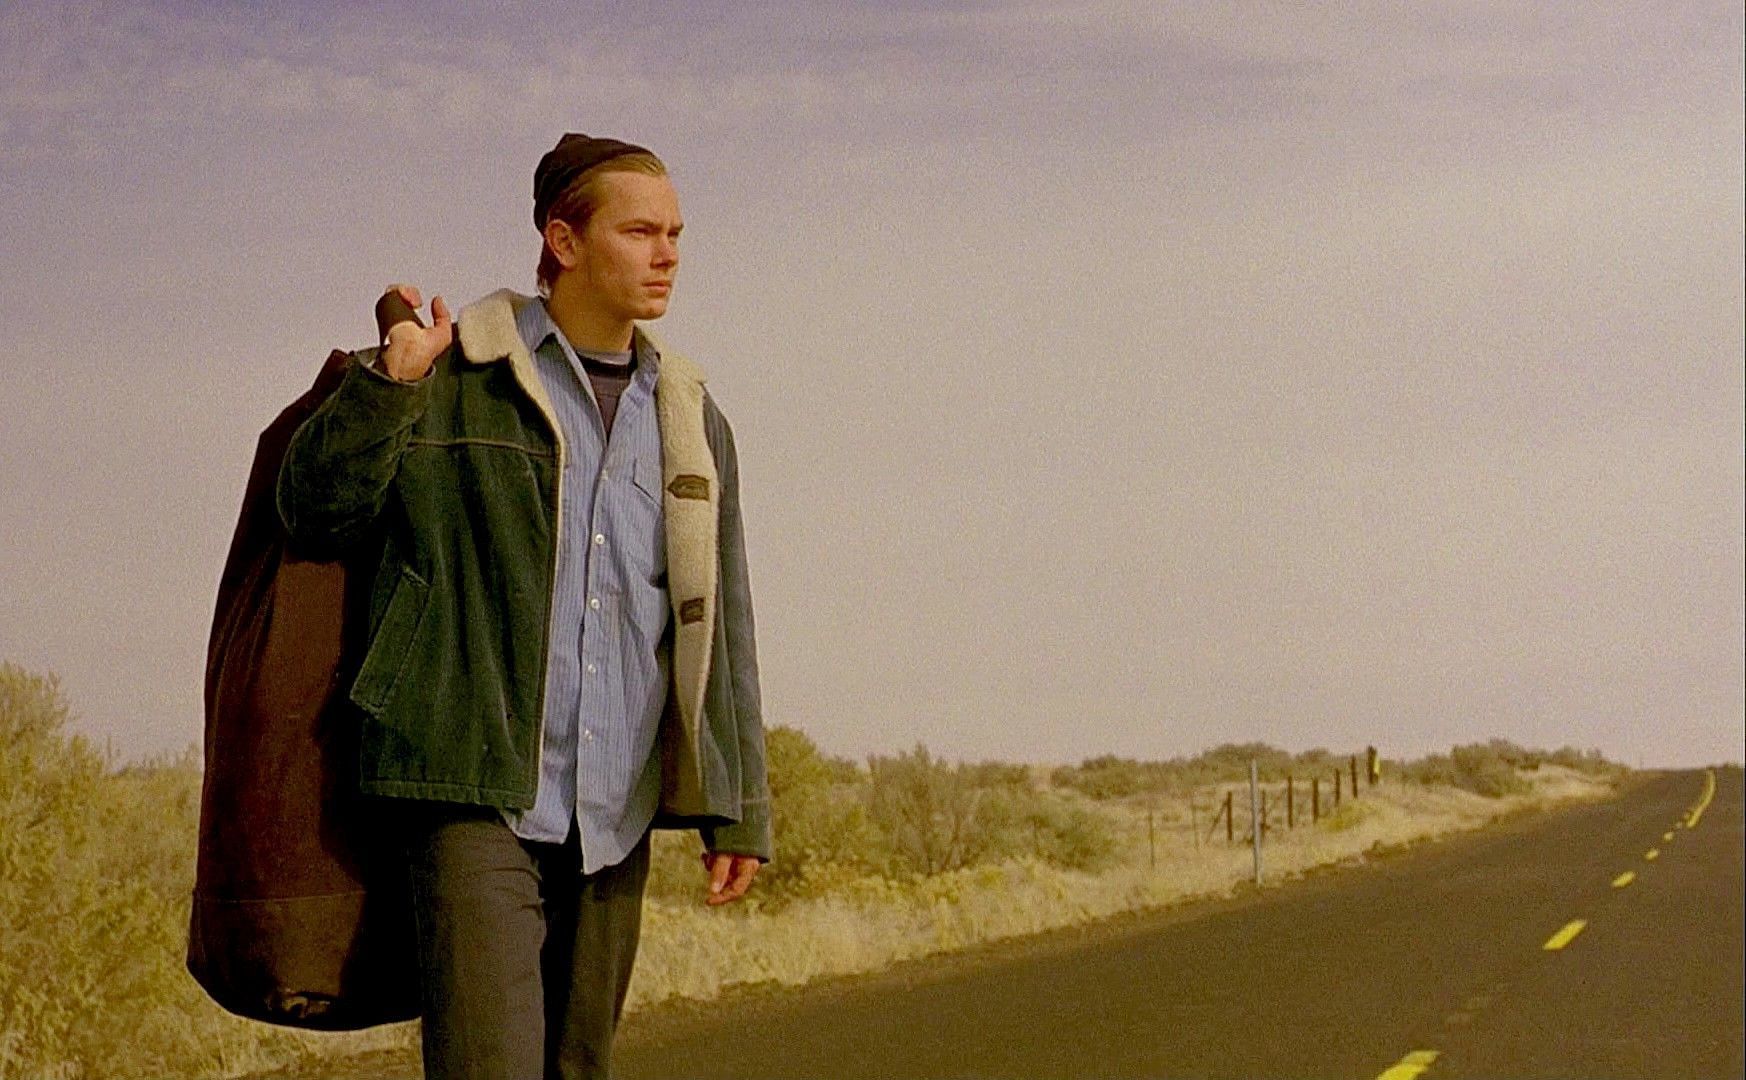 A still from My Own Private Idaho (image via Fine Line Pictures)